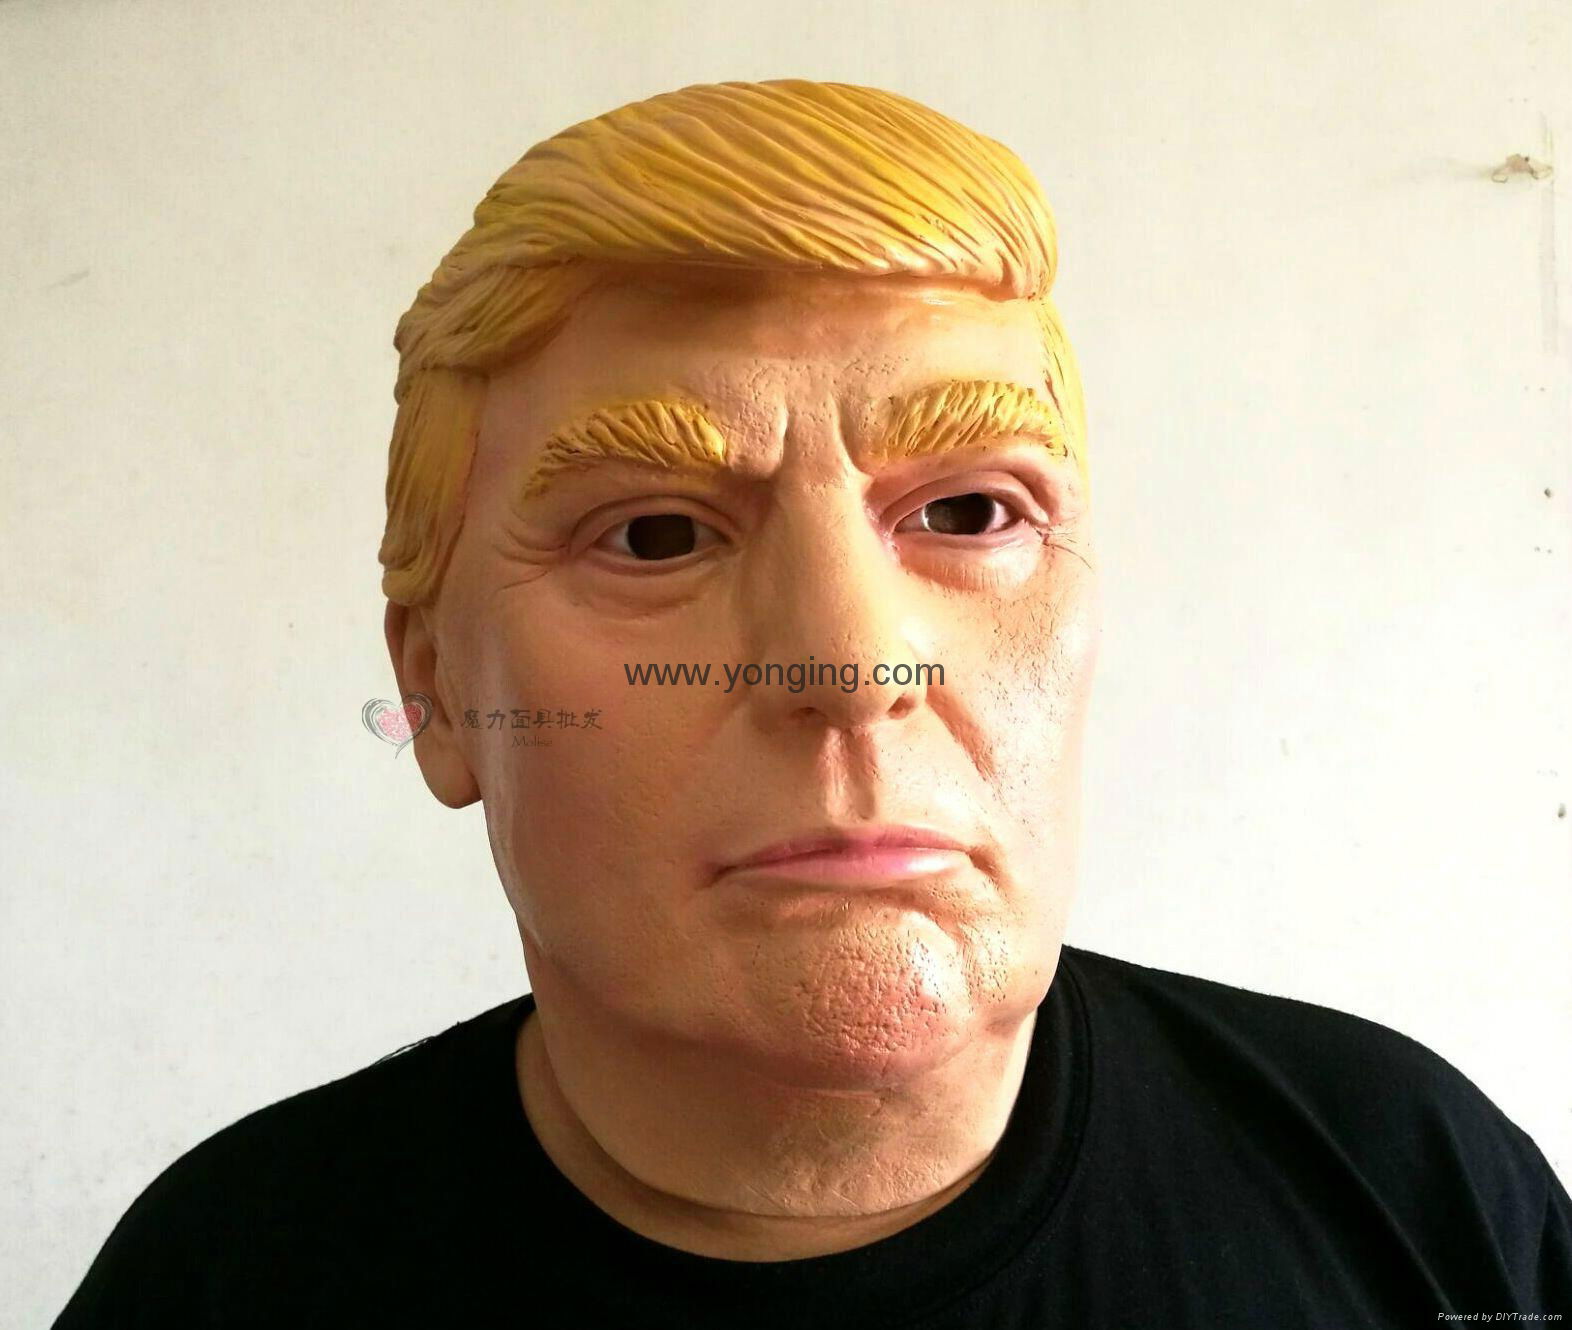  trump mask for party,rubber mask 4